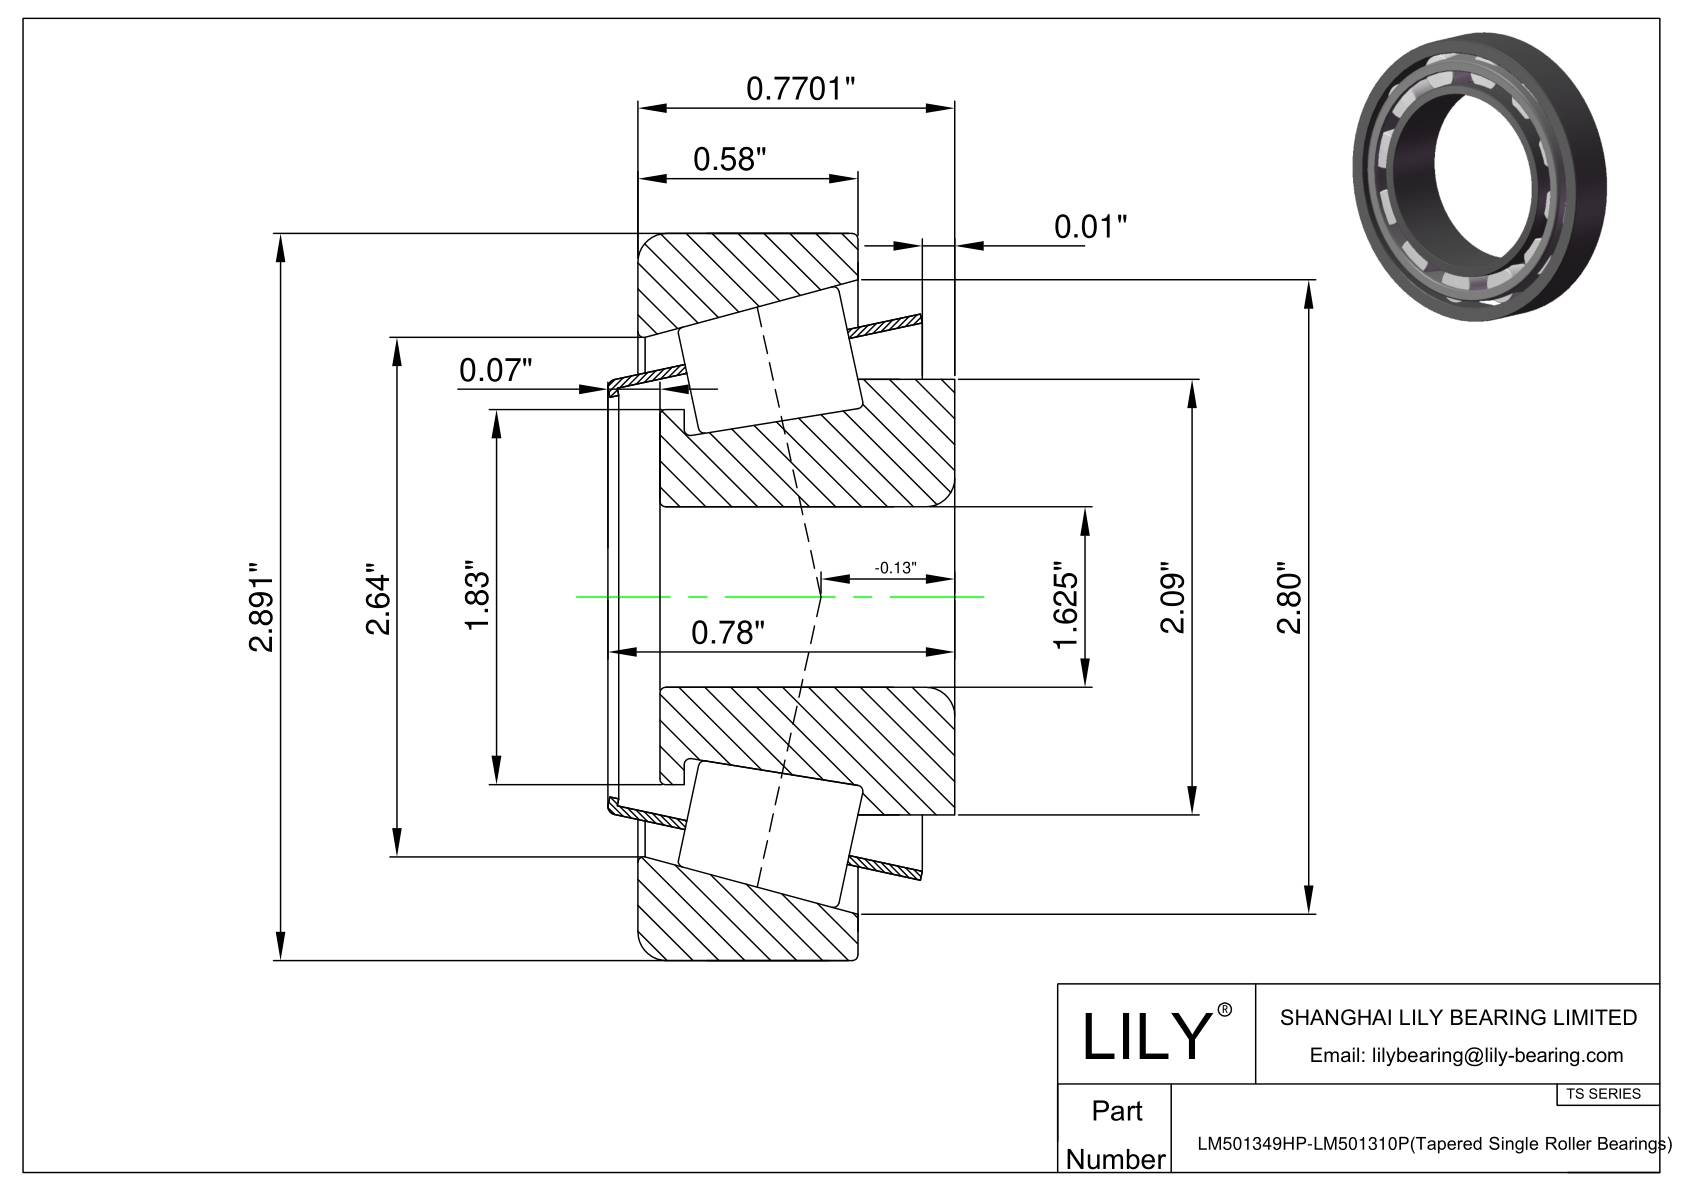 LM501349HP-LM501310P TS (Tapered Single Roller Bearings) (Imperial) cad drawing